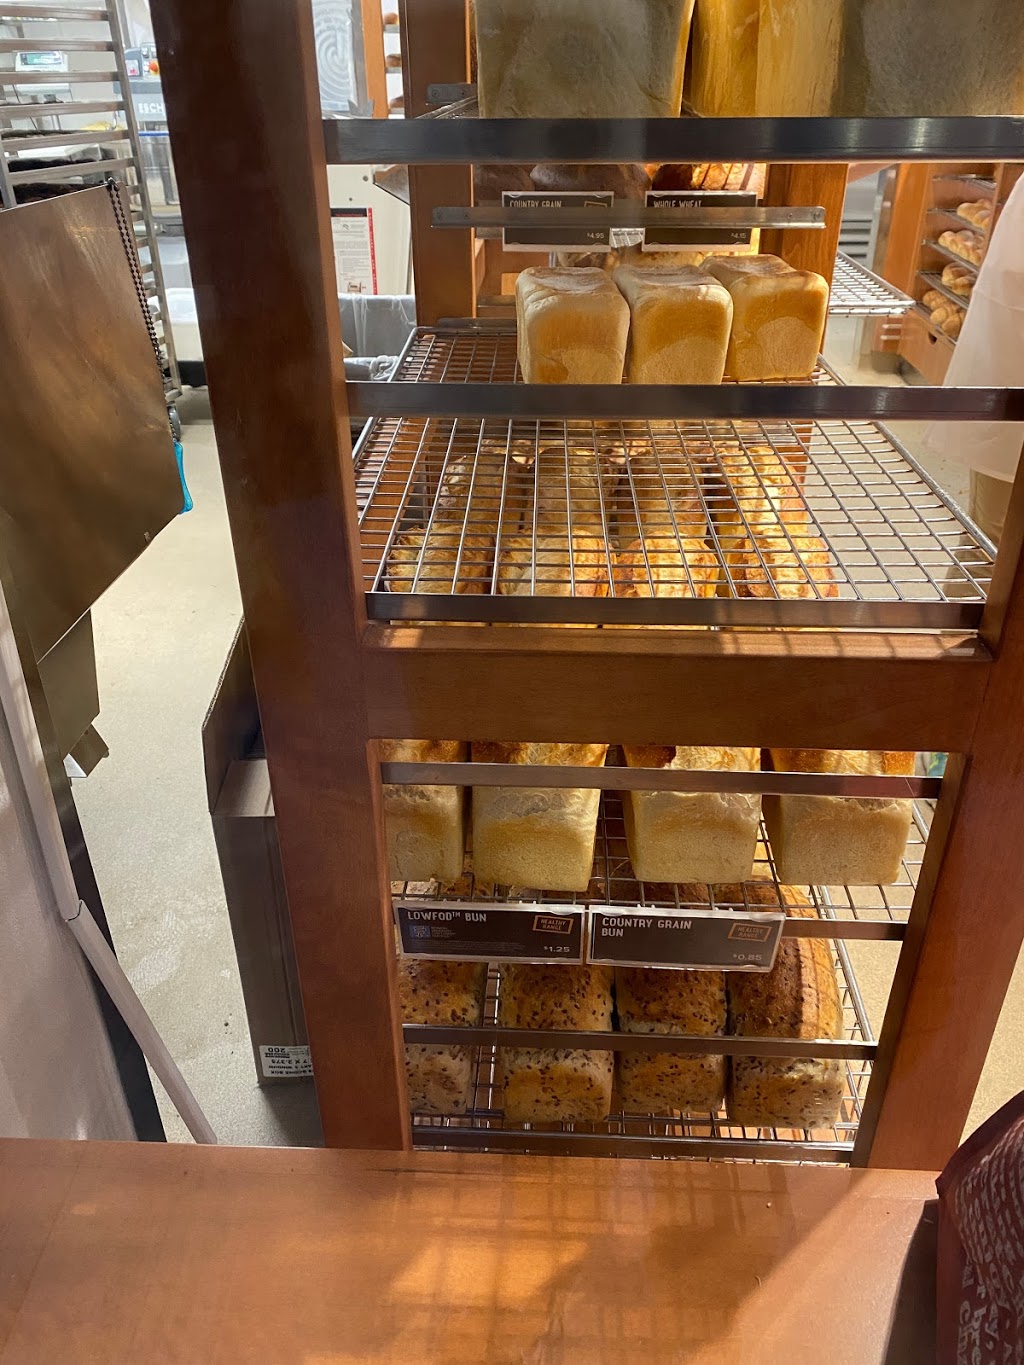 COBS Bread Bakery | Unit #10, 30 Broadleaf Ave Unit 10, Whitby, ON L1R 3N8, Canada | Phone: (905) 425-7788